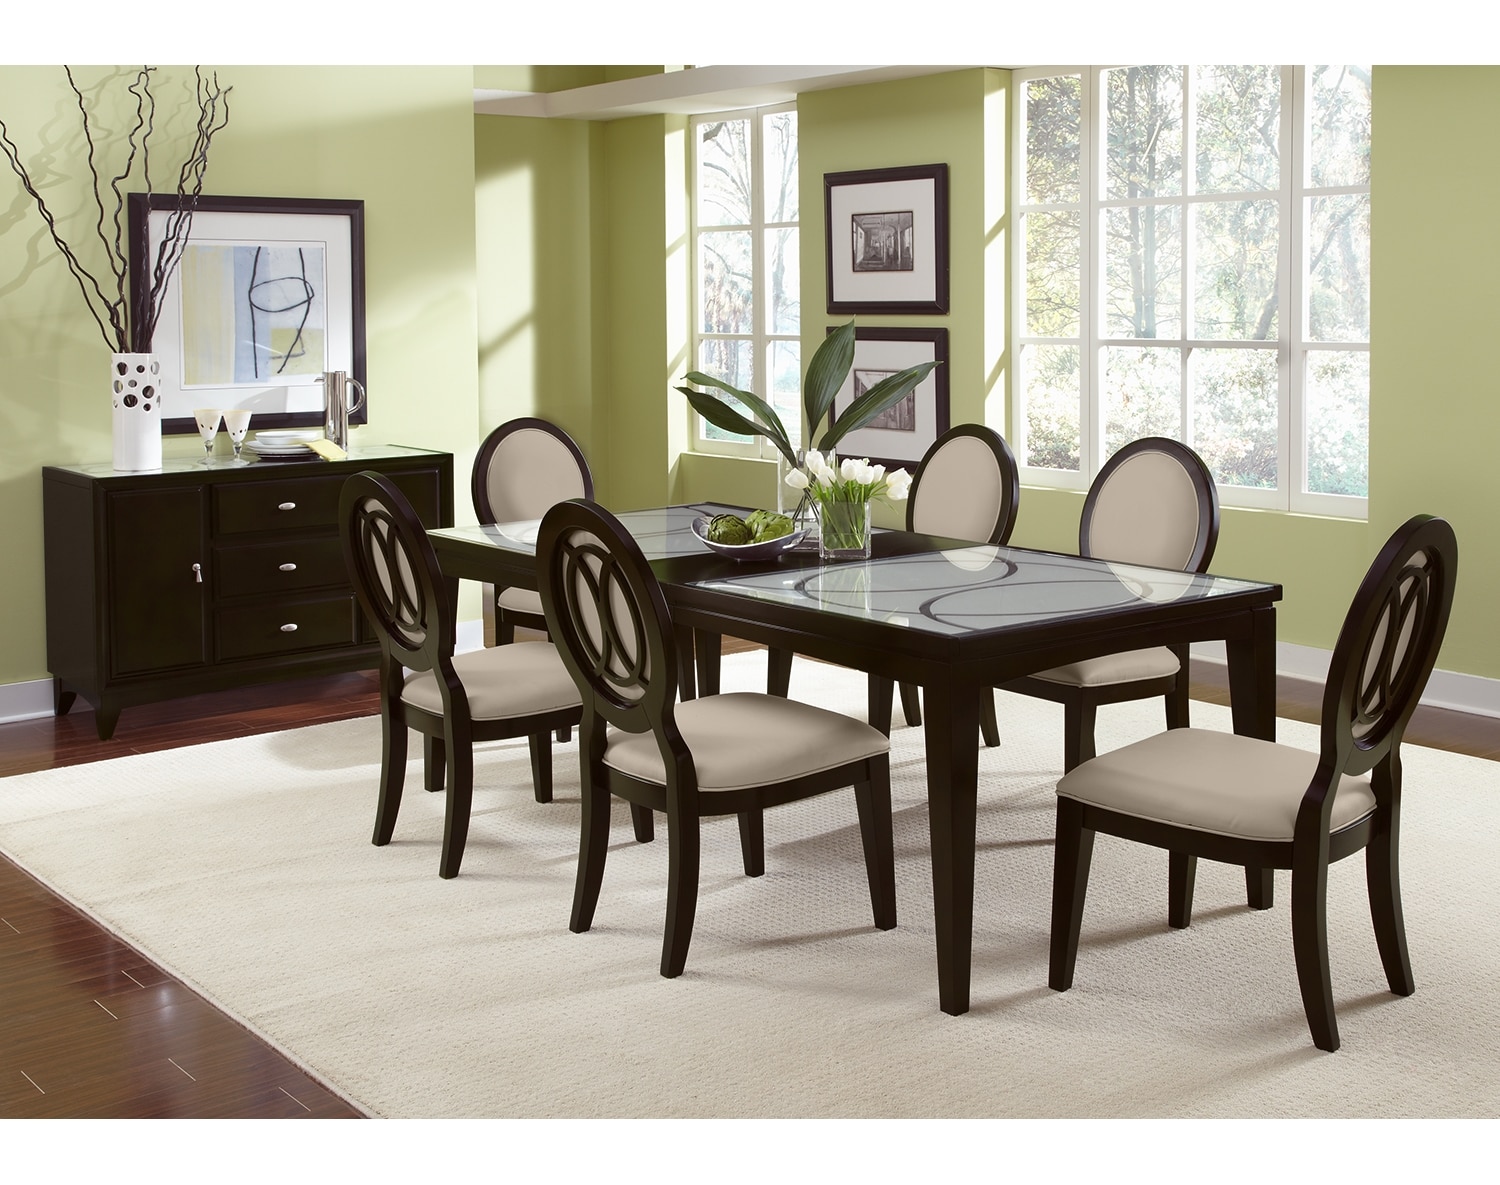 Shop Dining Room Collections Value City Furniture throughout Kitchen Table Sets At Value City